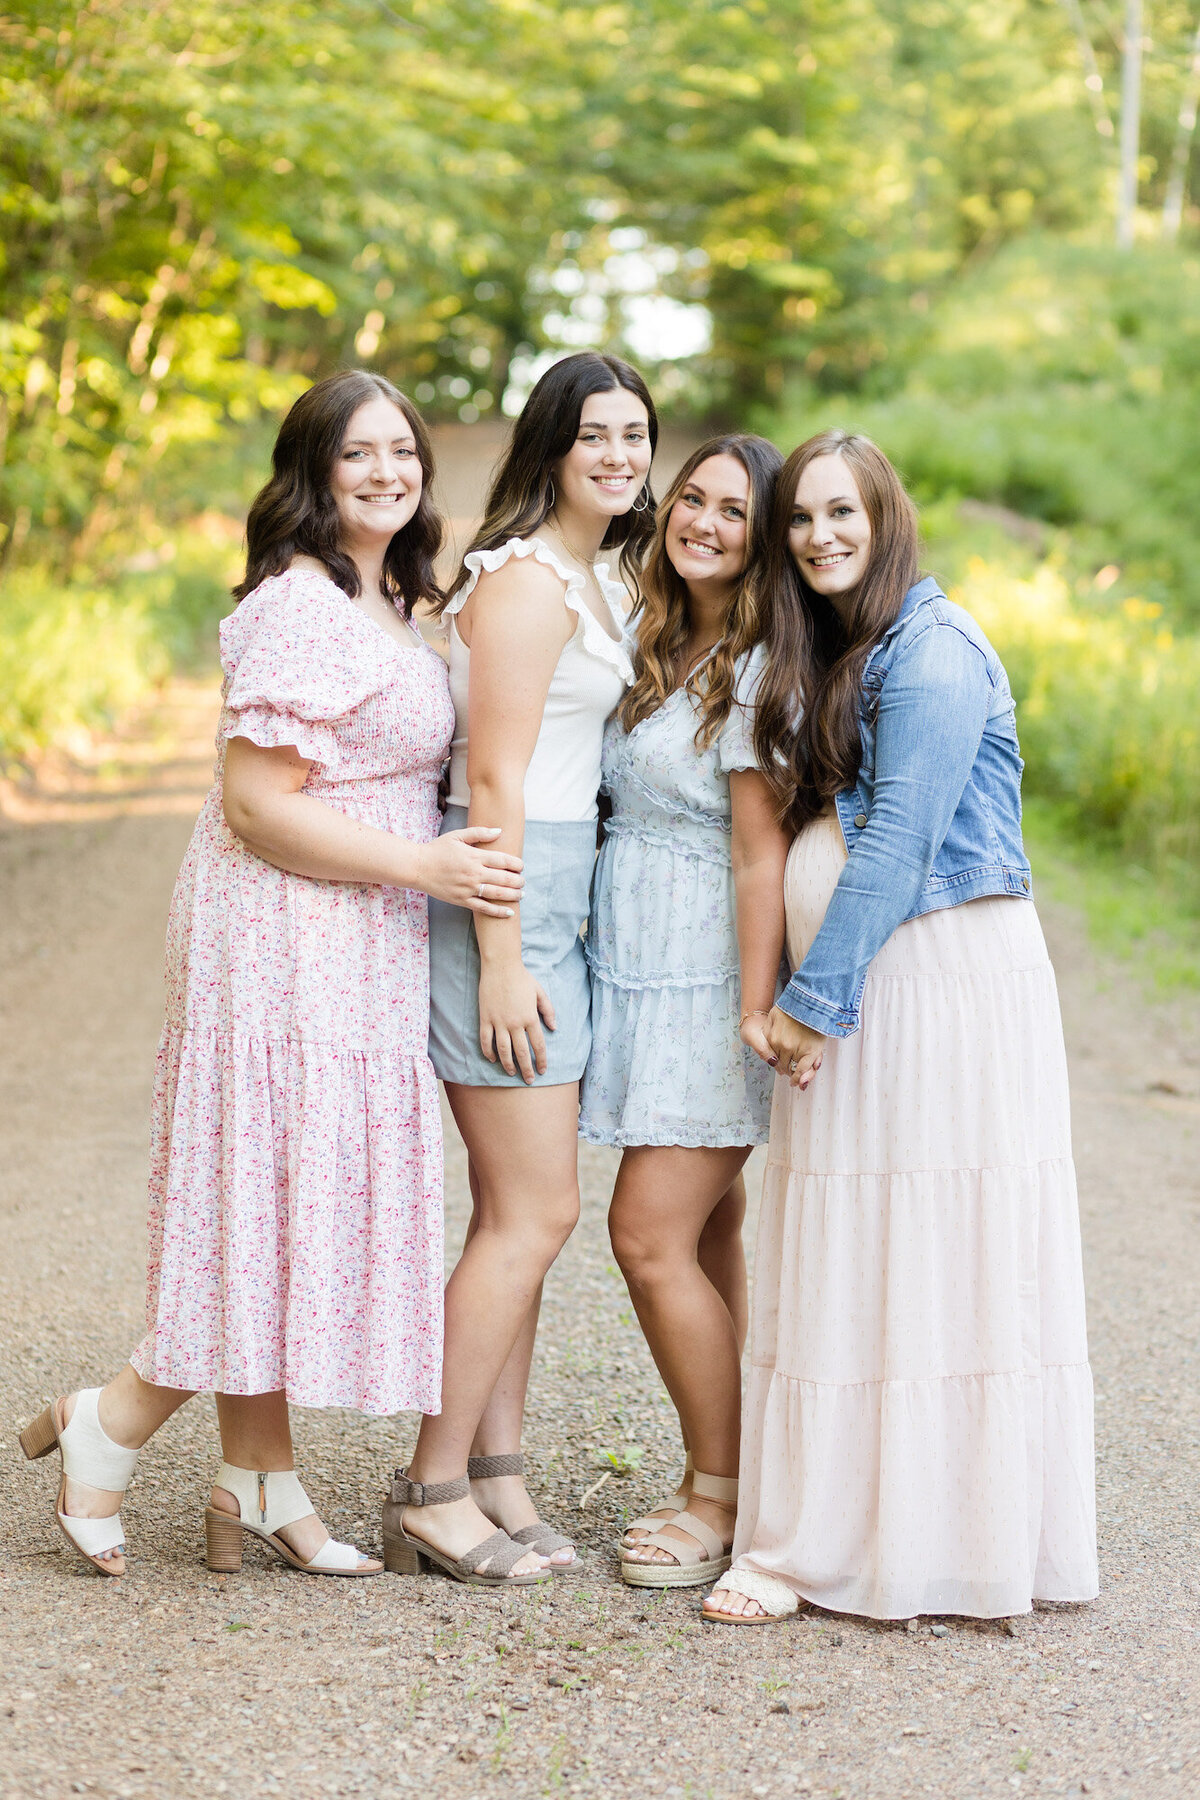 Family Photography _ Eau Claire, Wisconsin, Chippewa Valley _ Brand, Senior and Family Photographer _ Christy Janeczko Photography - 5